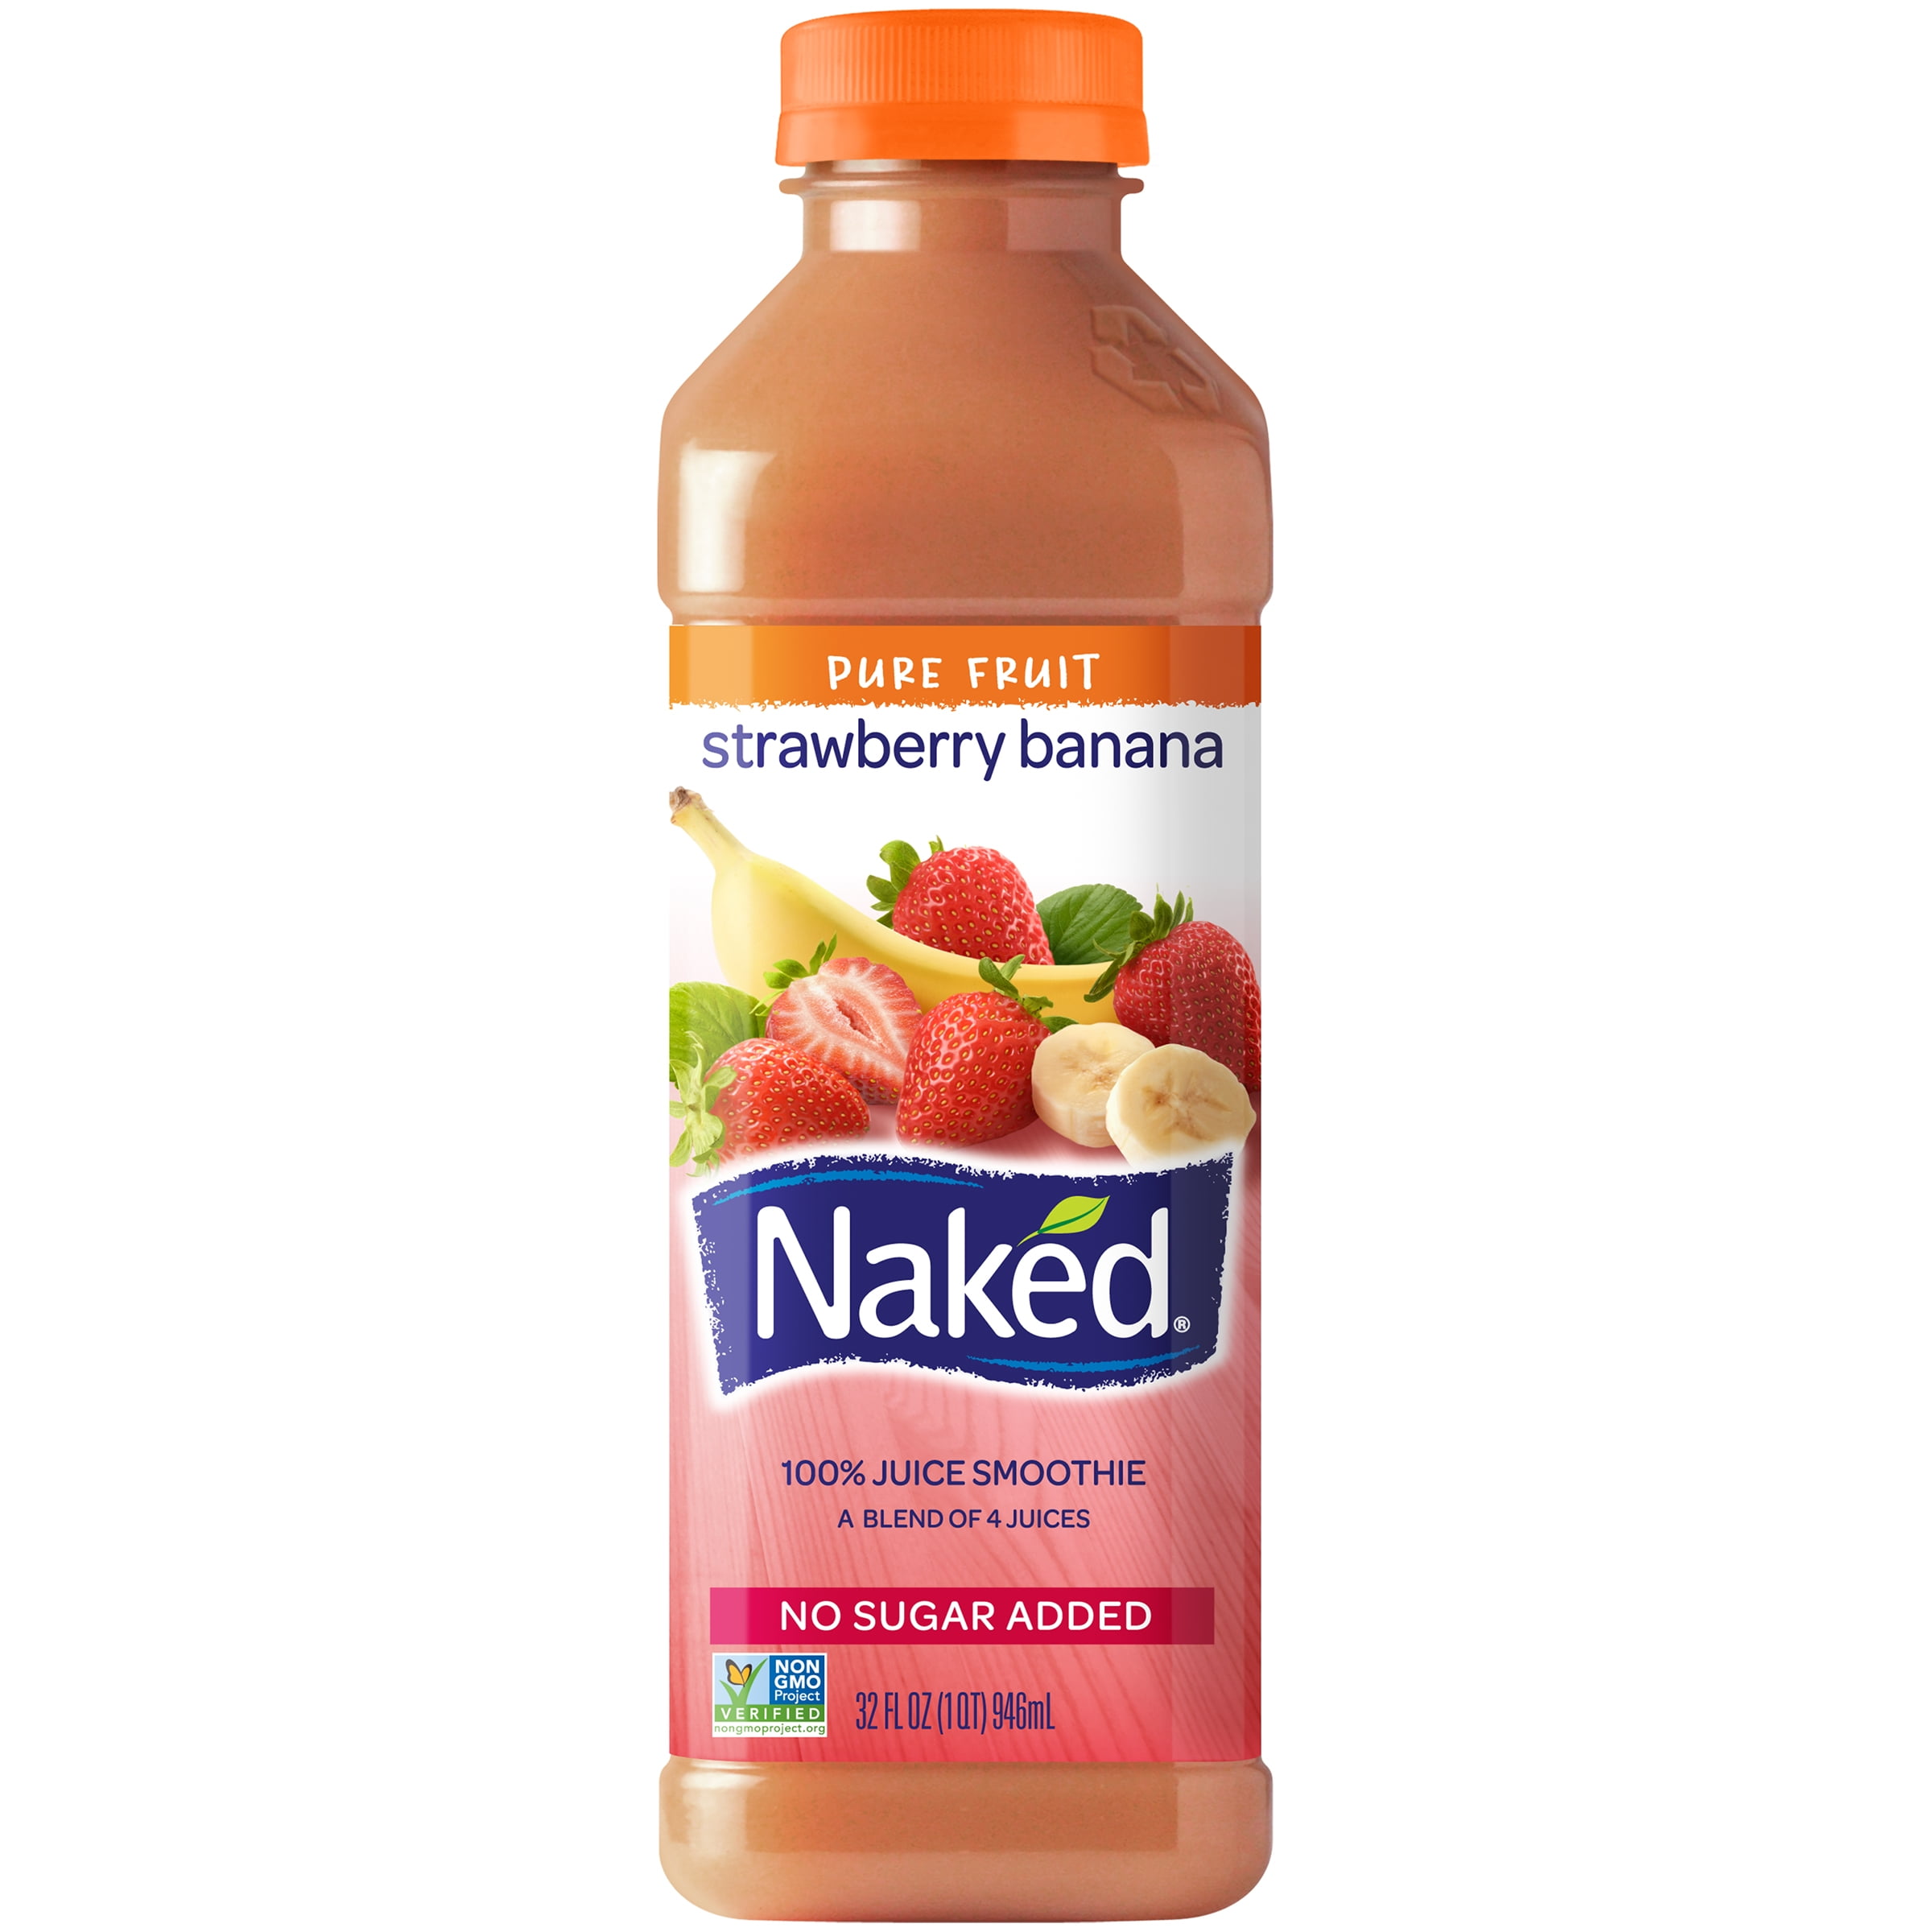 Here's What You Need To Know About The Naked Juice Lawsuit